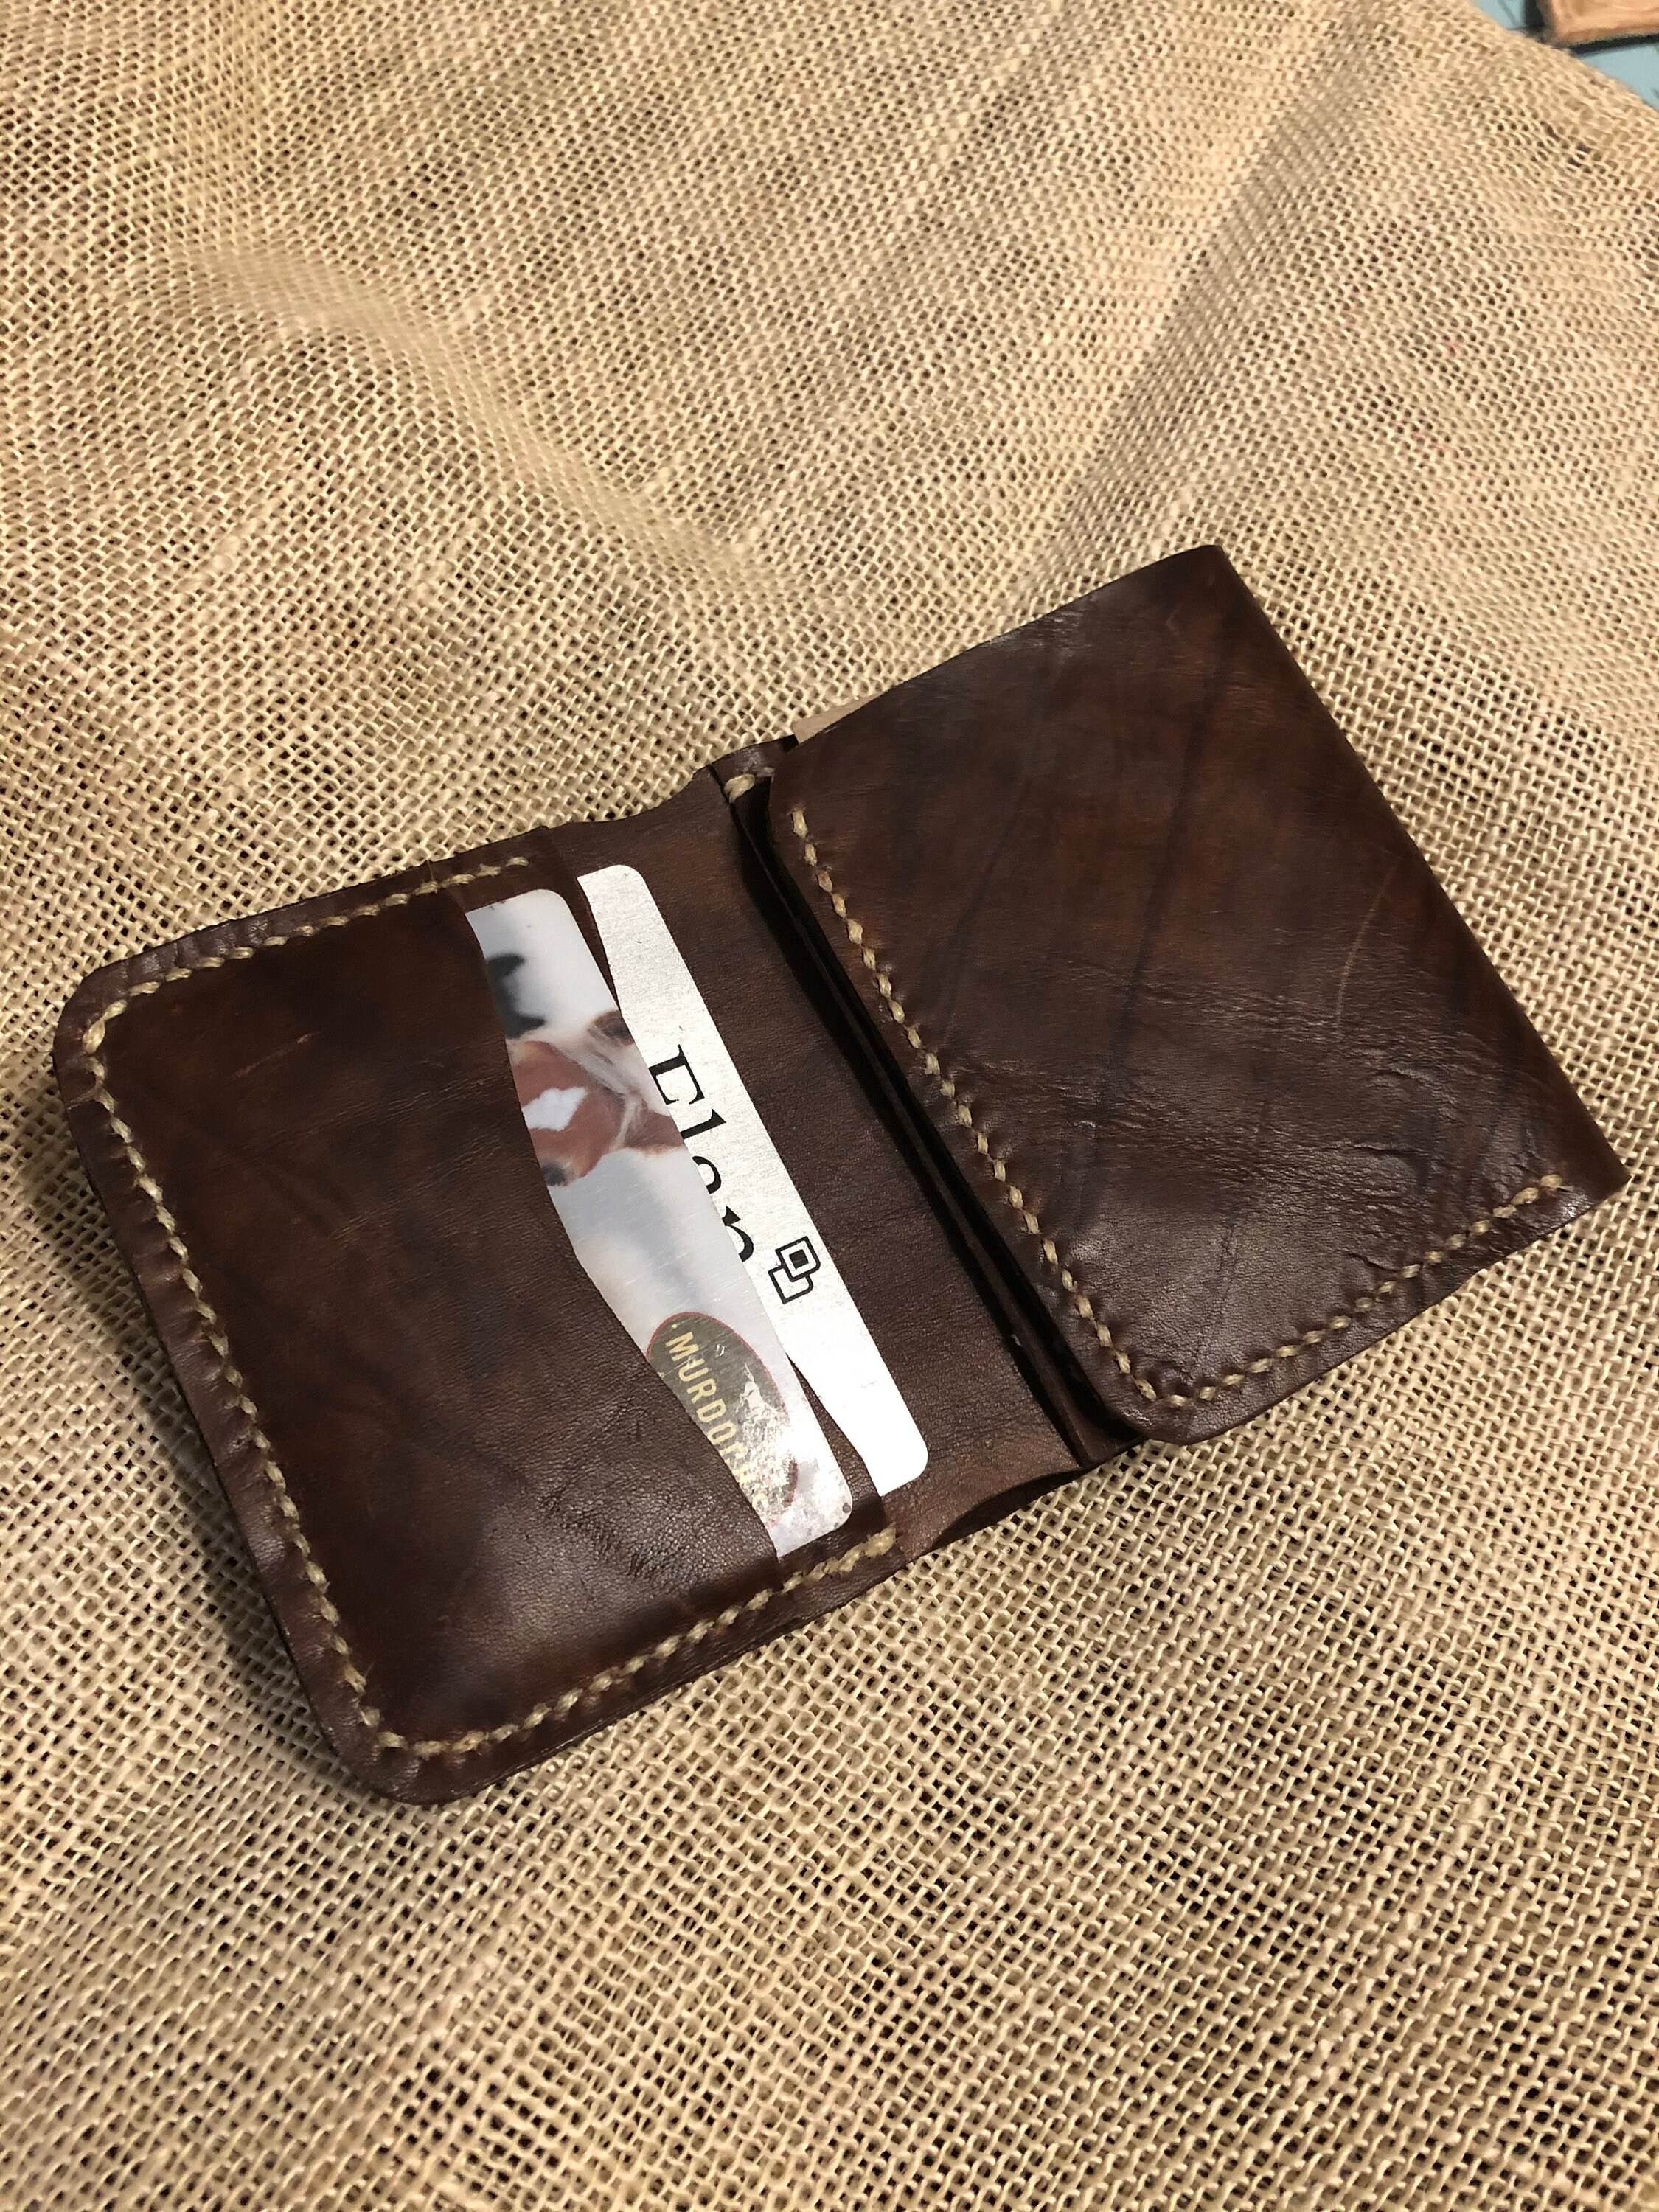 RIO BRAVO oil Tanned Leather Wallet - Etsy